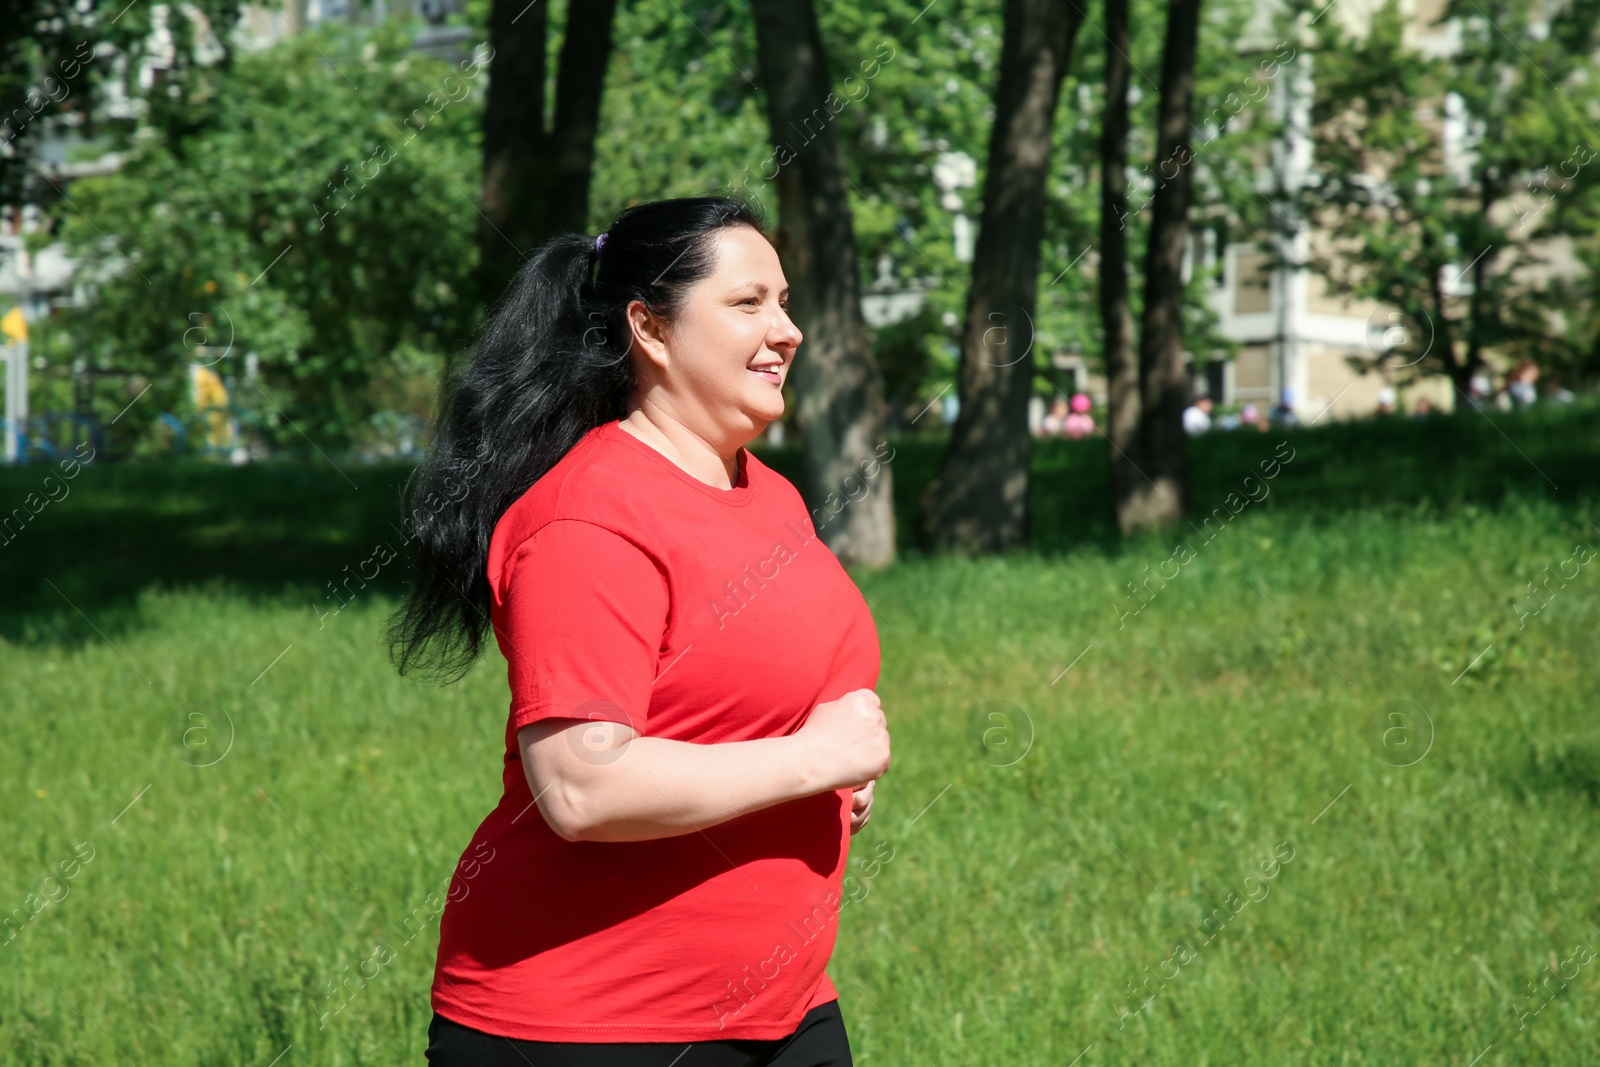 Photo of Overweight woman jogging in park on sunny day